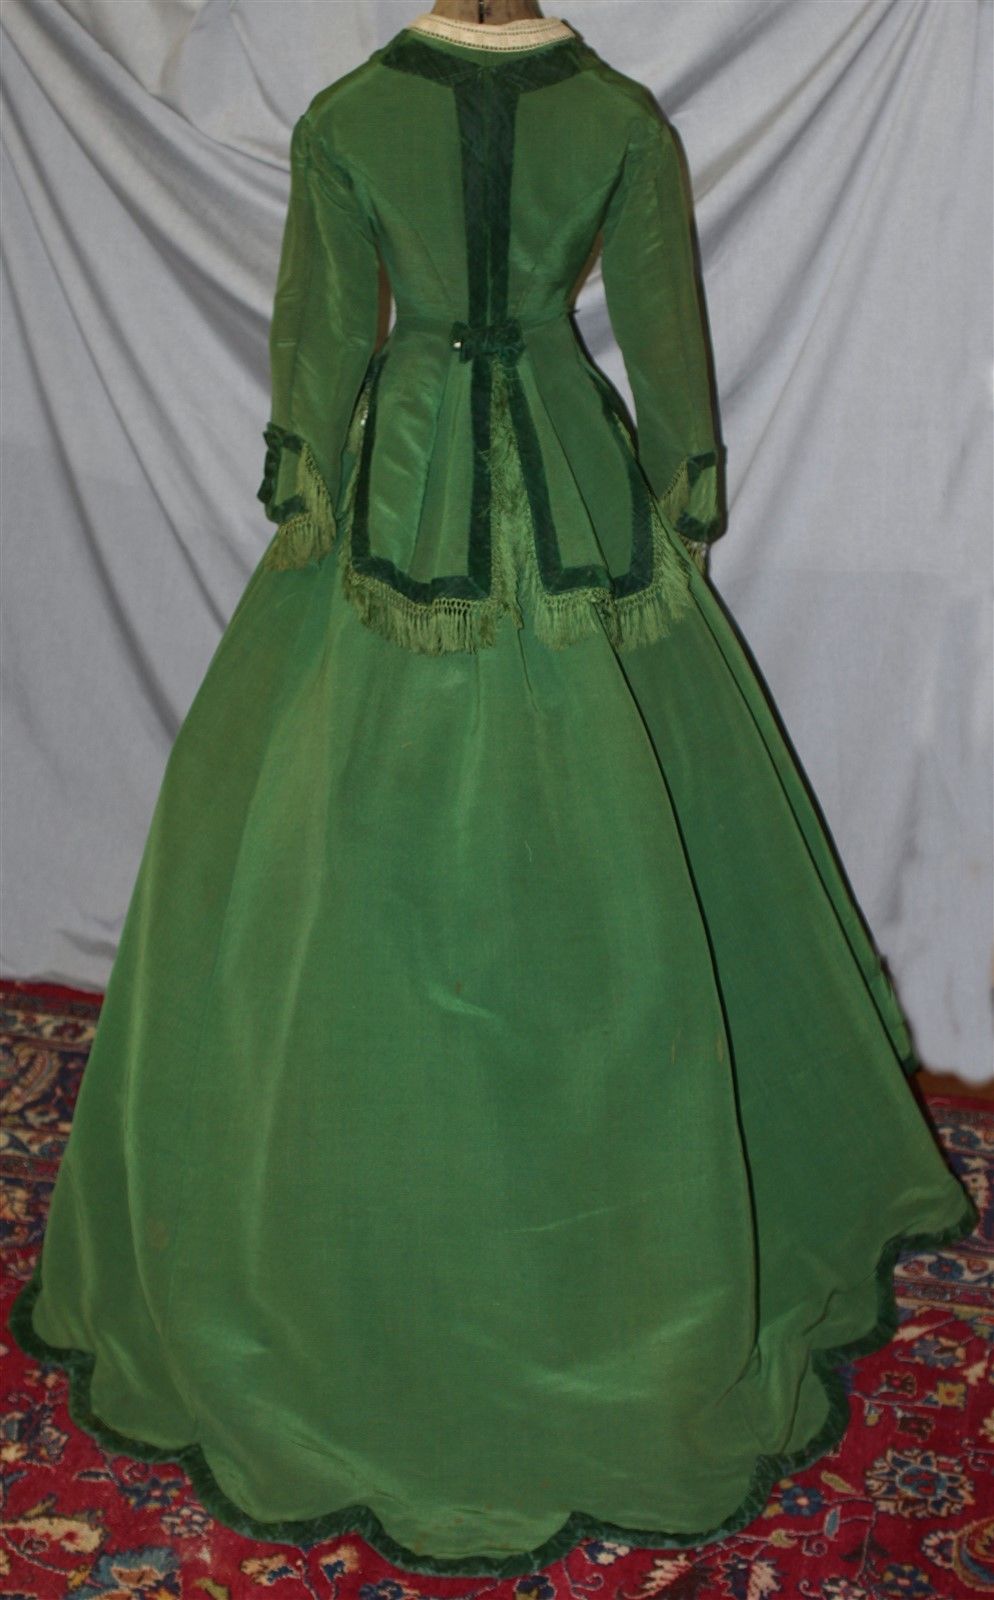 All The Pretty Dresses: Green Dress from 1867